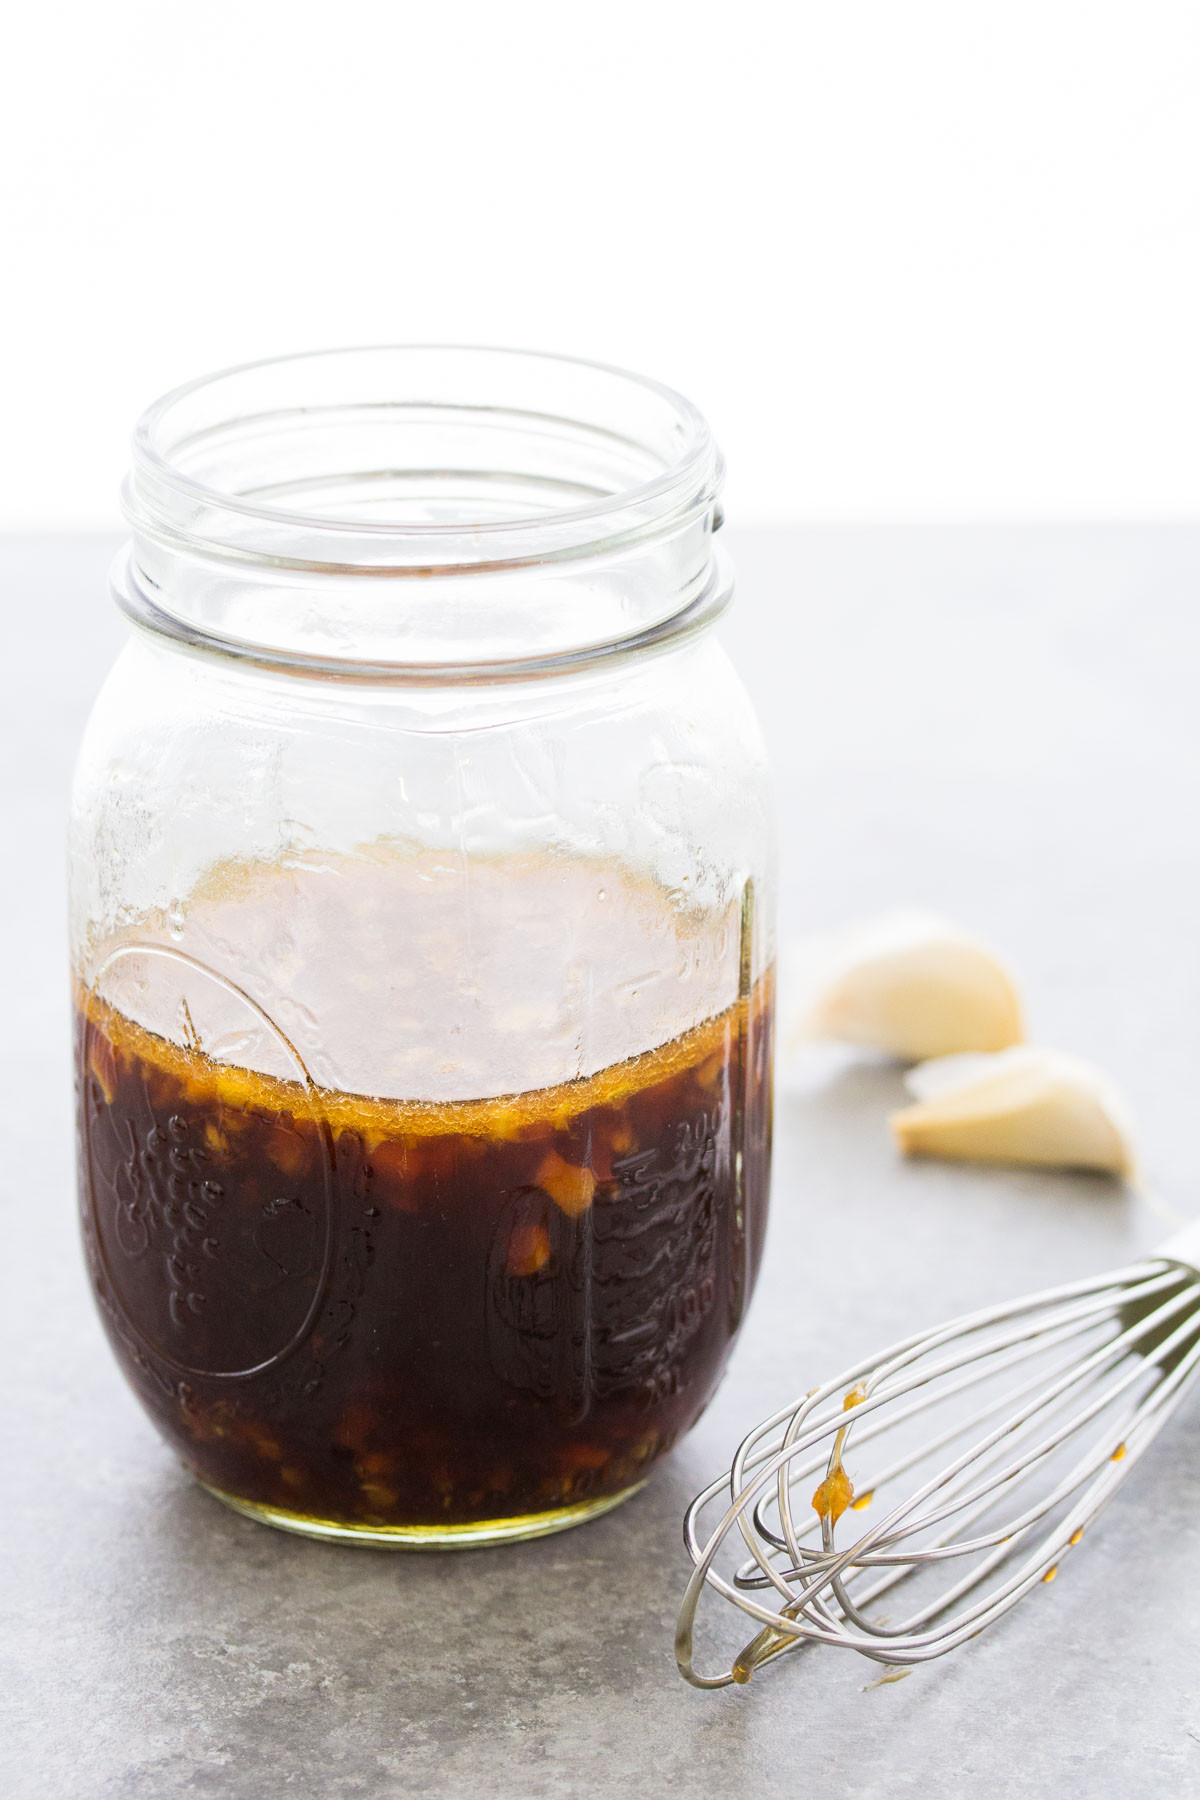 Quick And Easy Stir Fry Sauces
 The BEST Stir Fry Sauce Quick and Easy